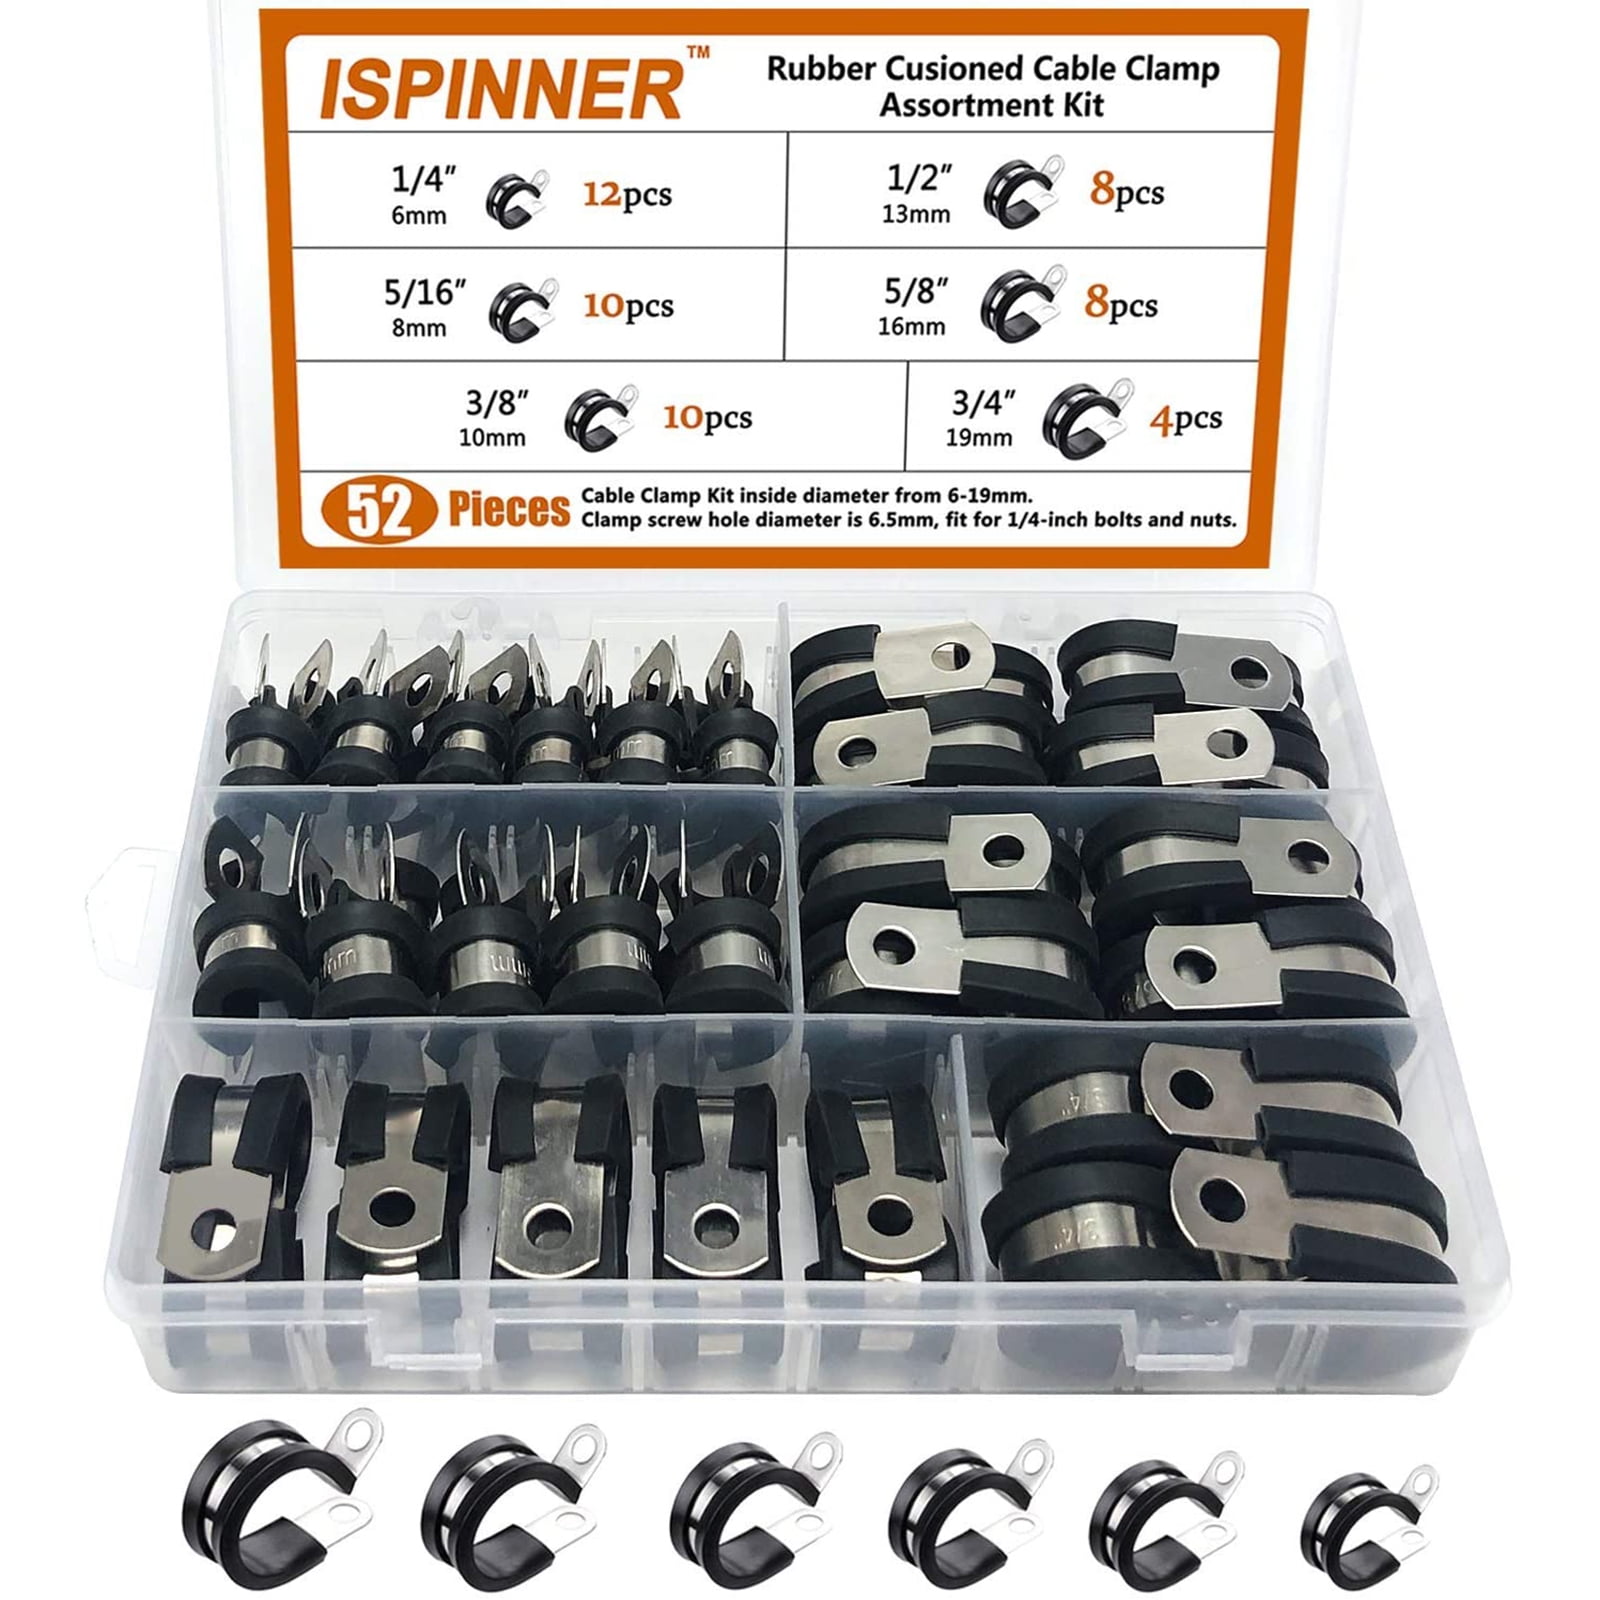 48pcs Cable Clamps Assortment Kit Rubber Cushion Insulated Clamp Stainless Steel 